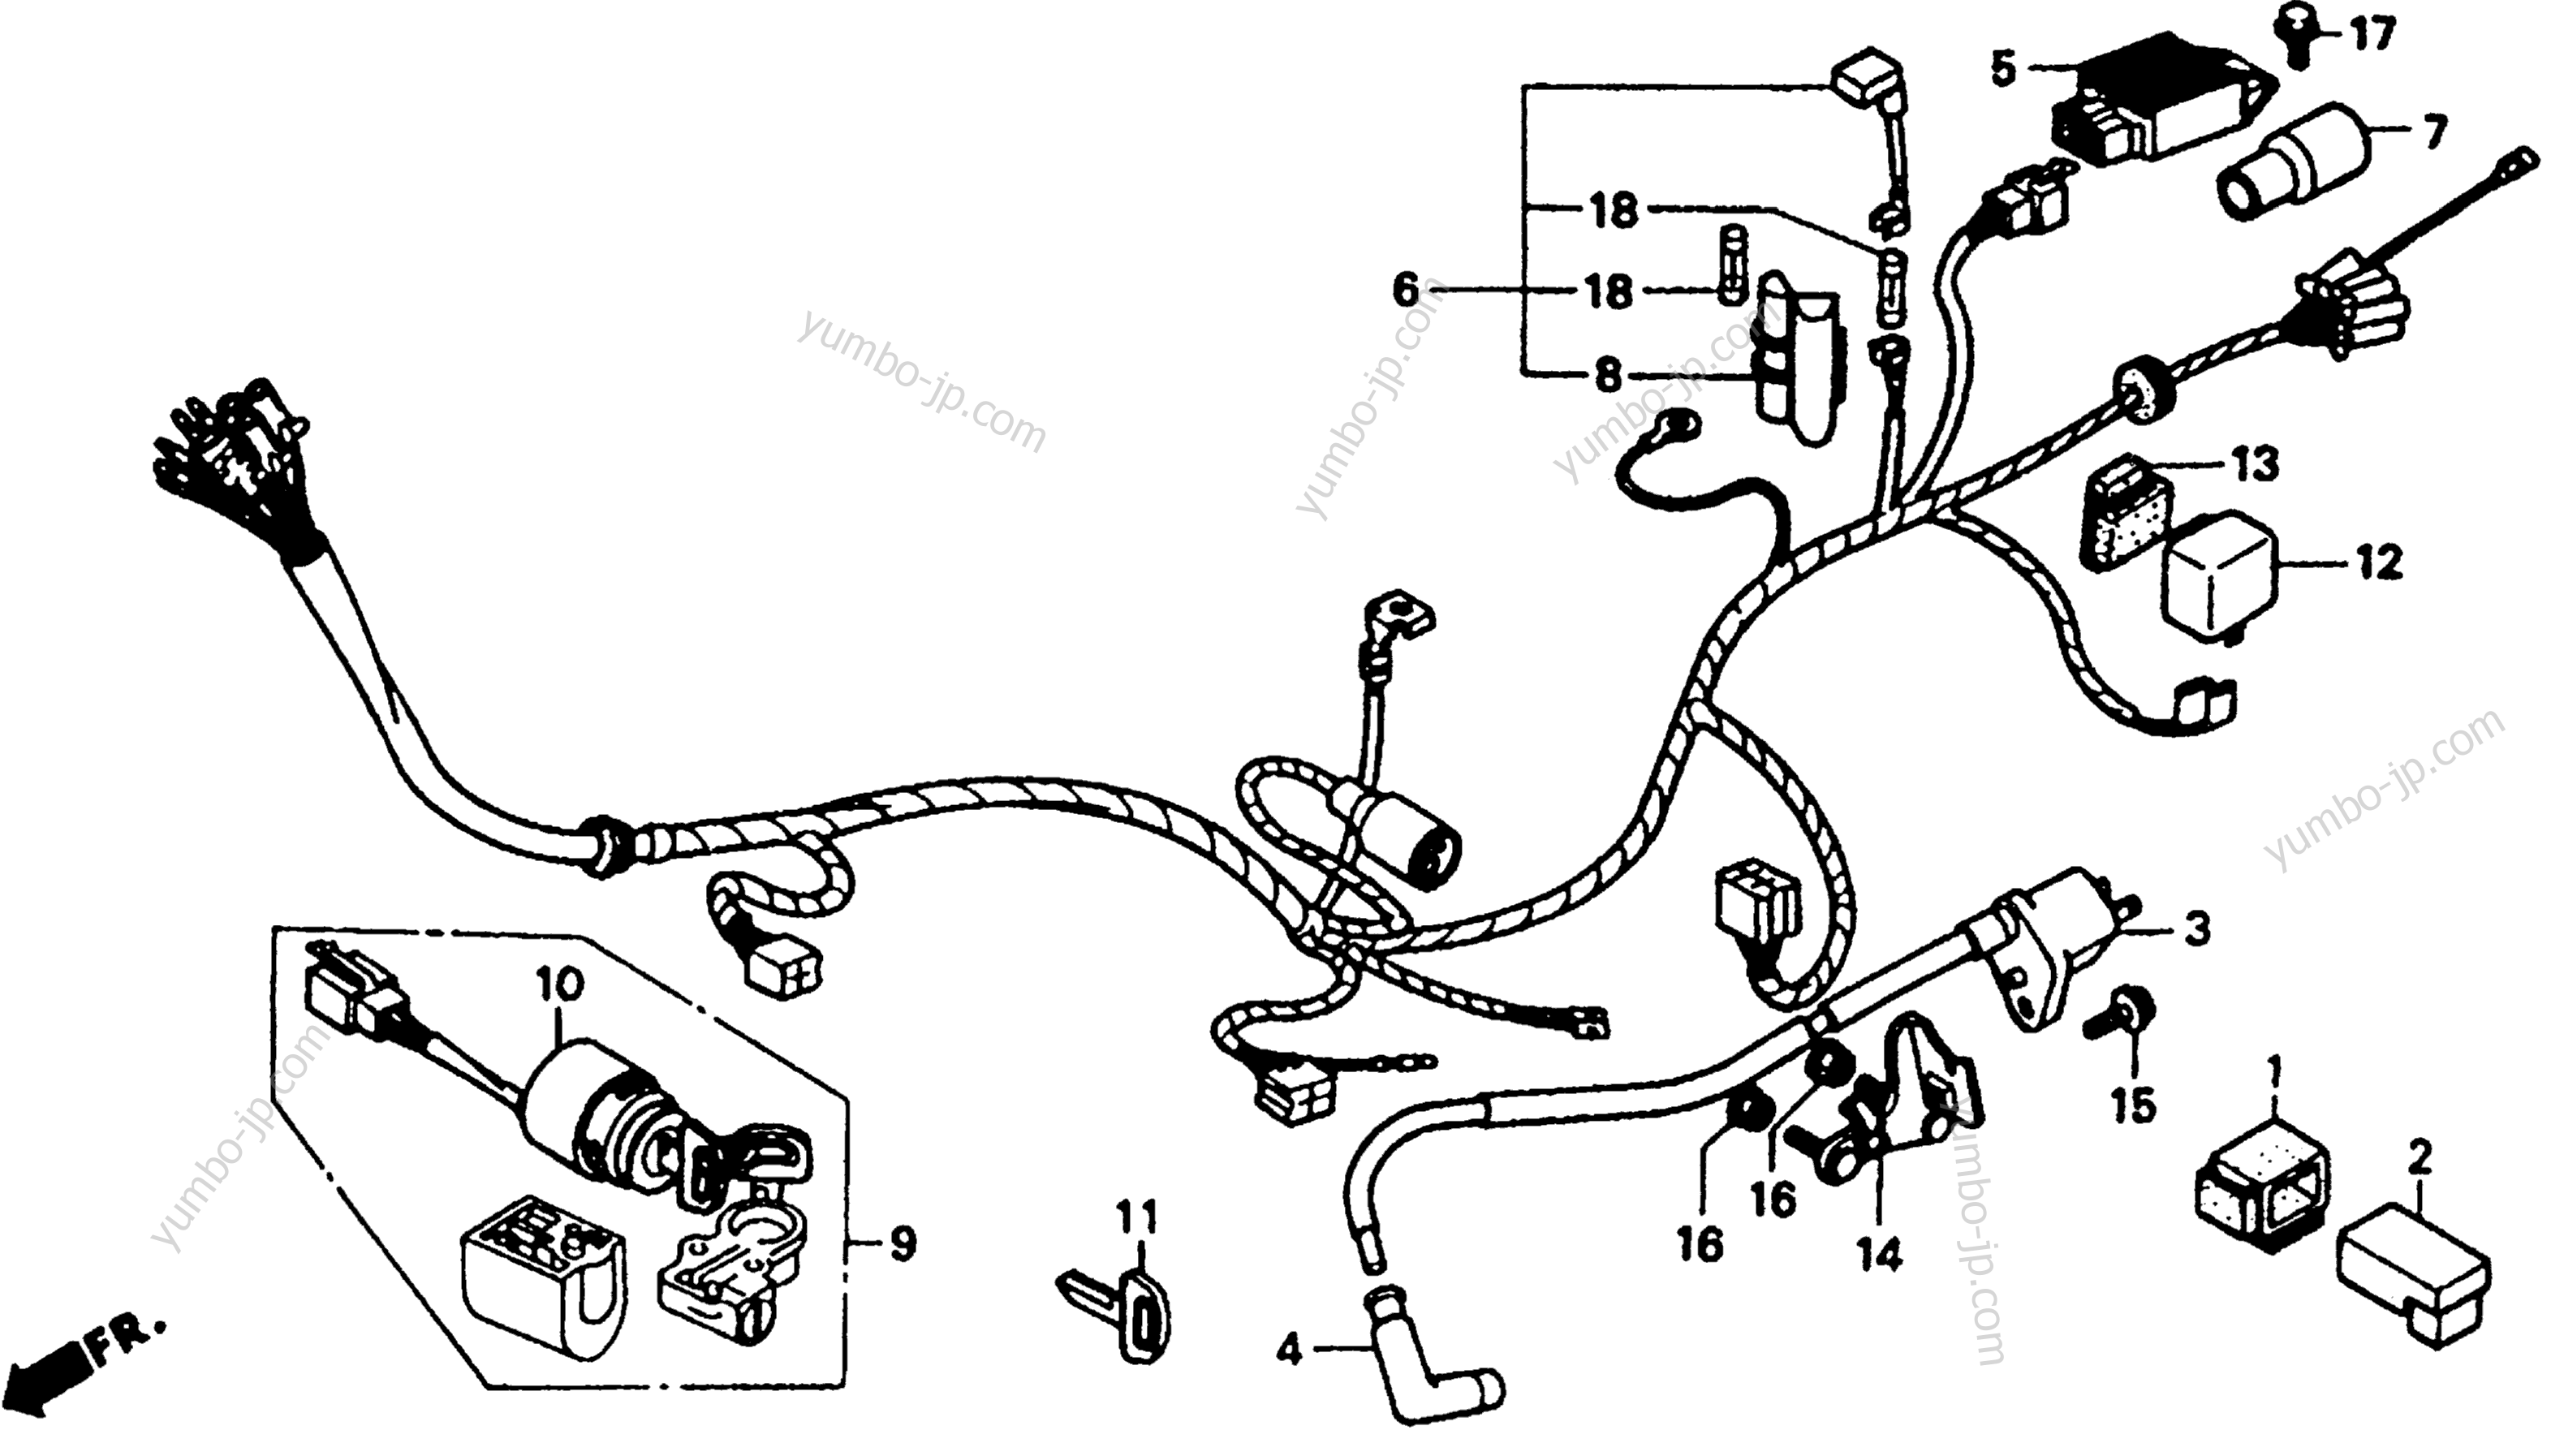 WIRE HARNESS for motorcycles HONDA CT70 AC 1993 year